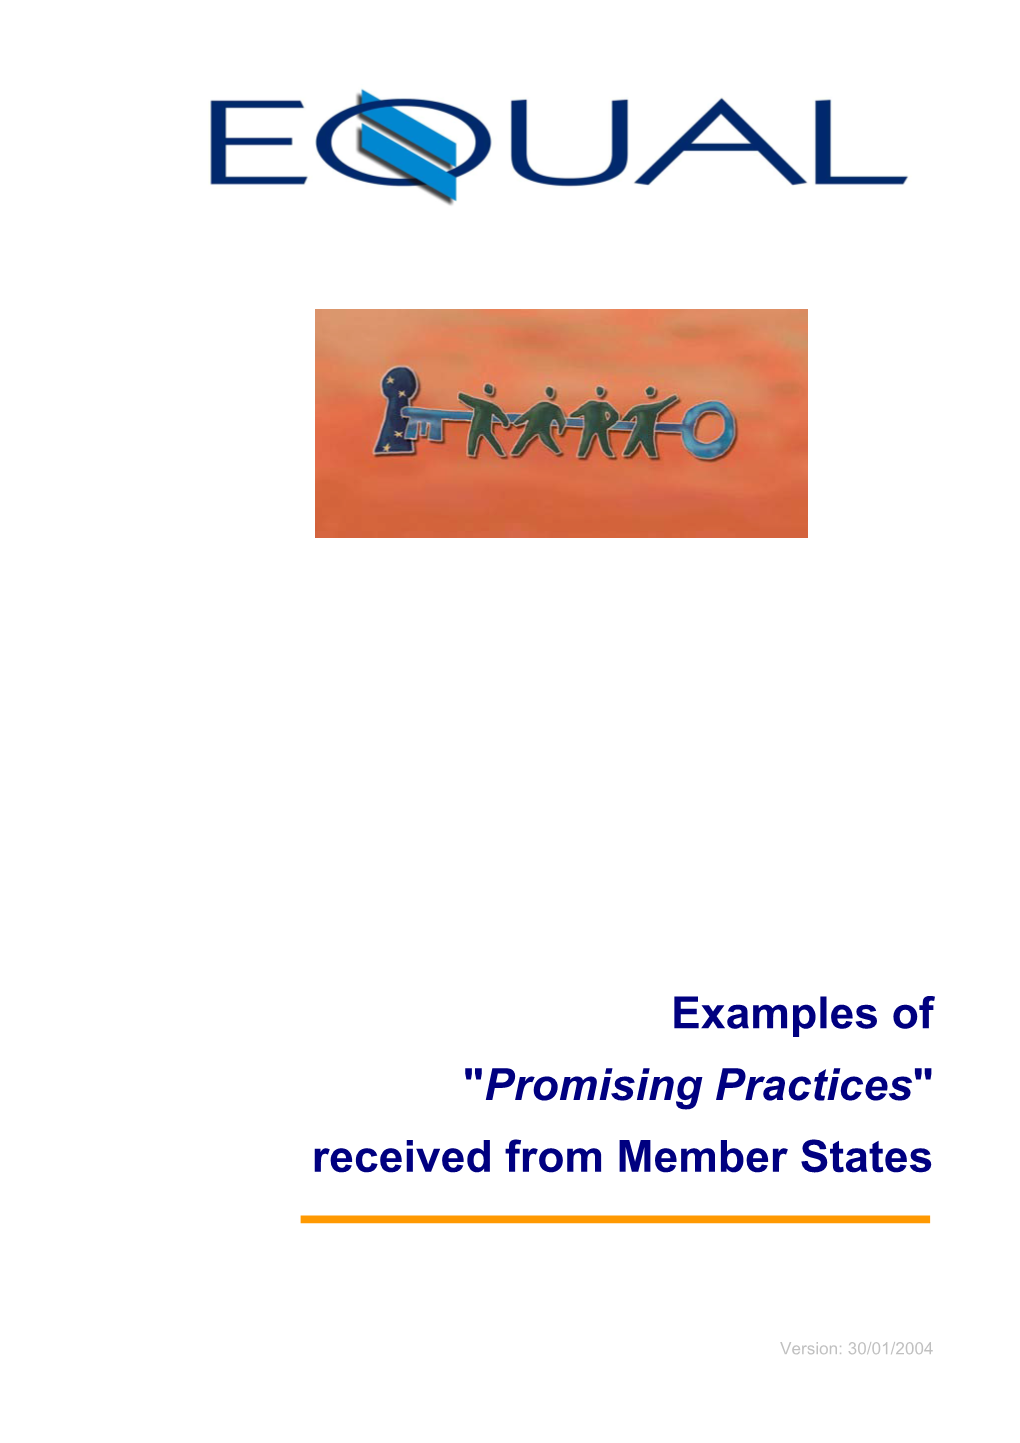 "Promising Practices" Received from Member States